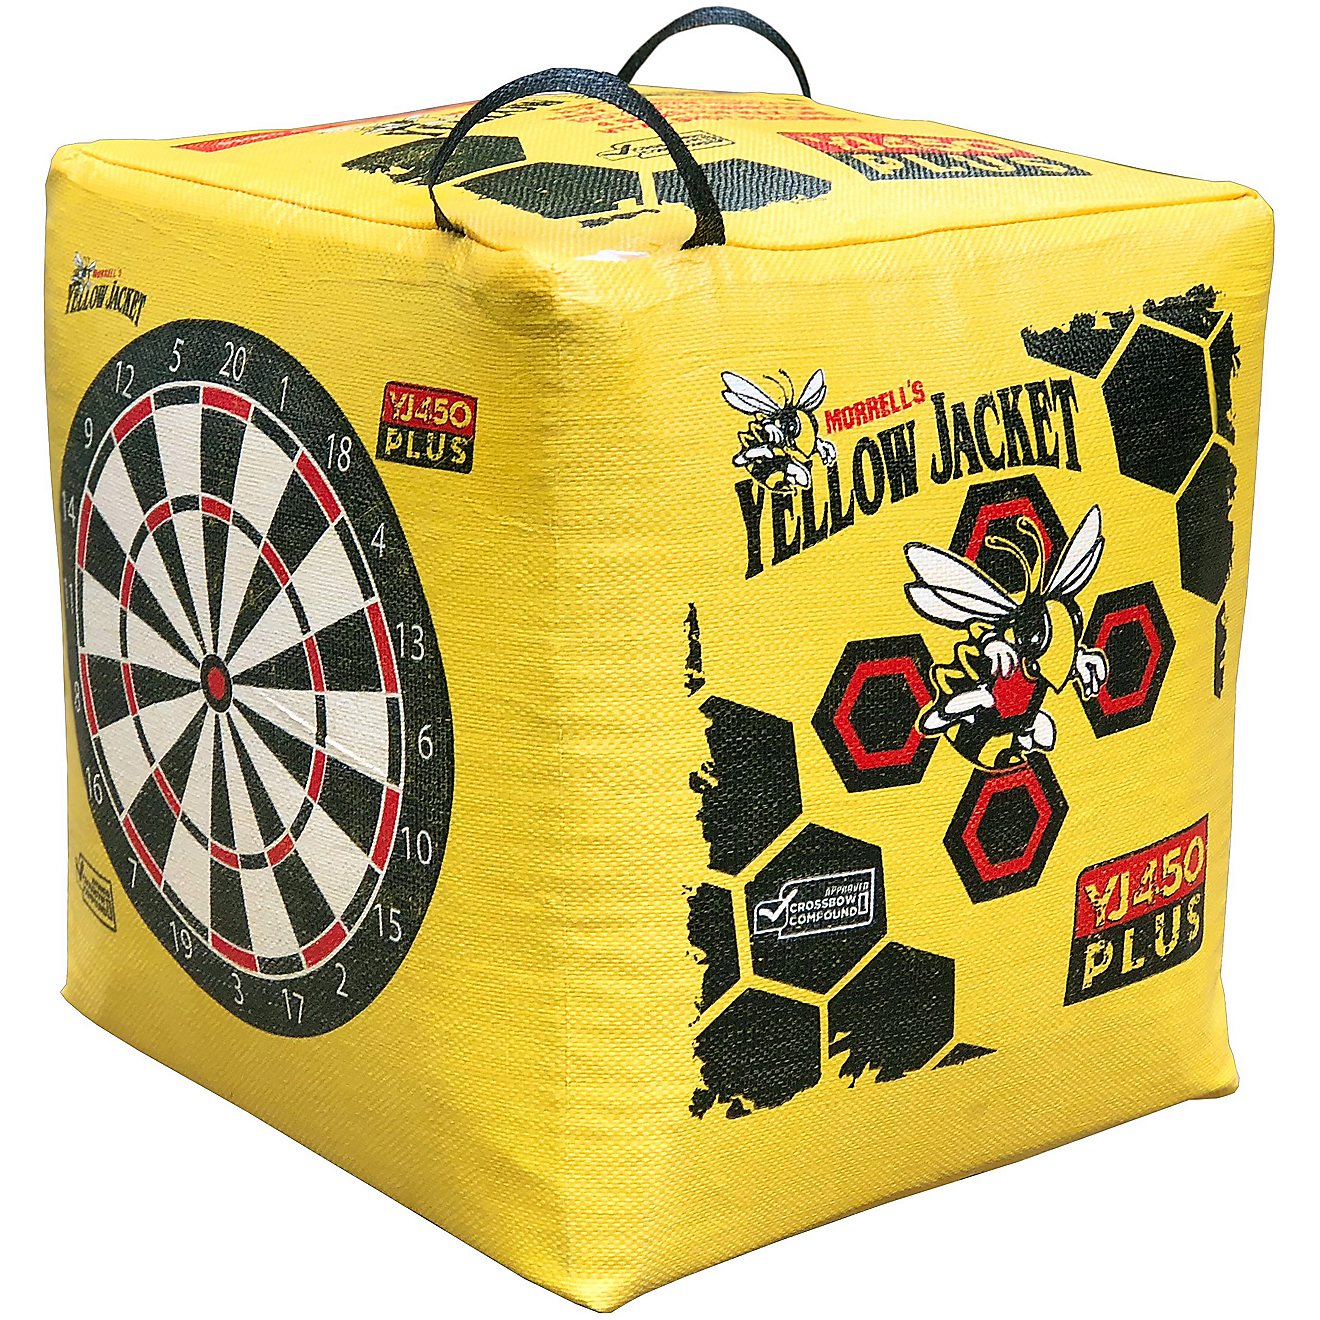 Morrell Yellow Jacket YJ-450 Plus Archery Target                                                                                 - view number 1